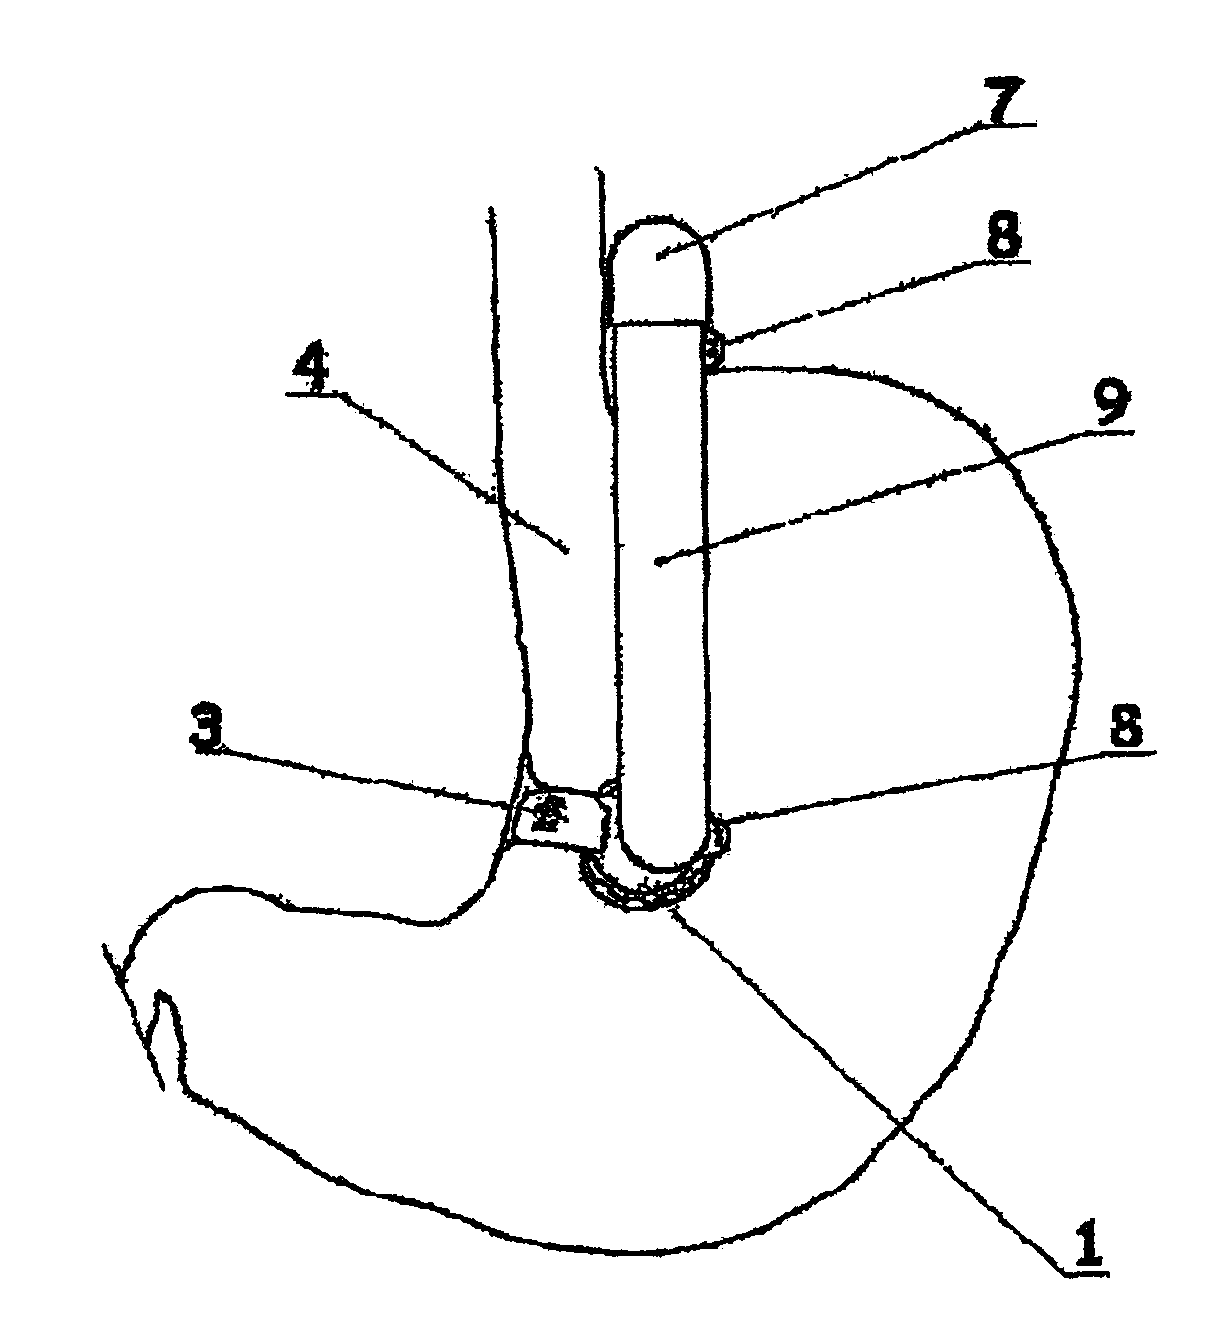 Gastric clamp for performing vertical band gastroplasty and a gastric bypass with lesser curvature